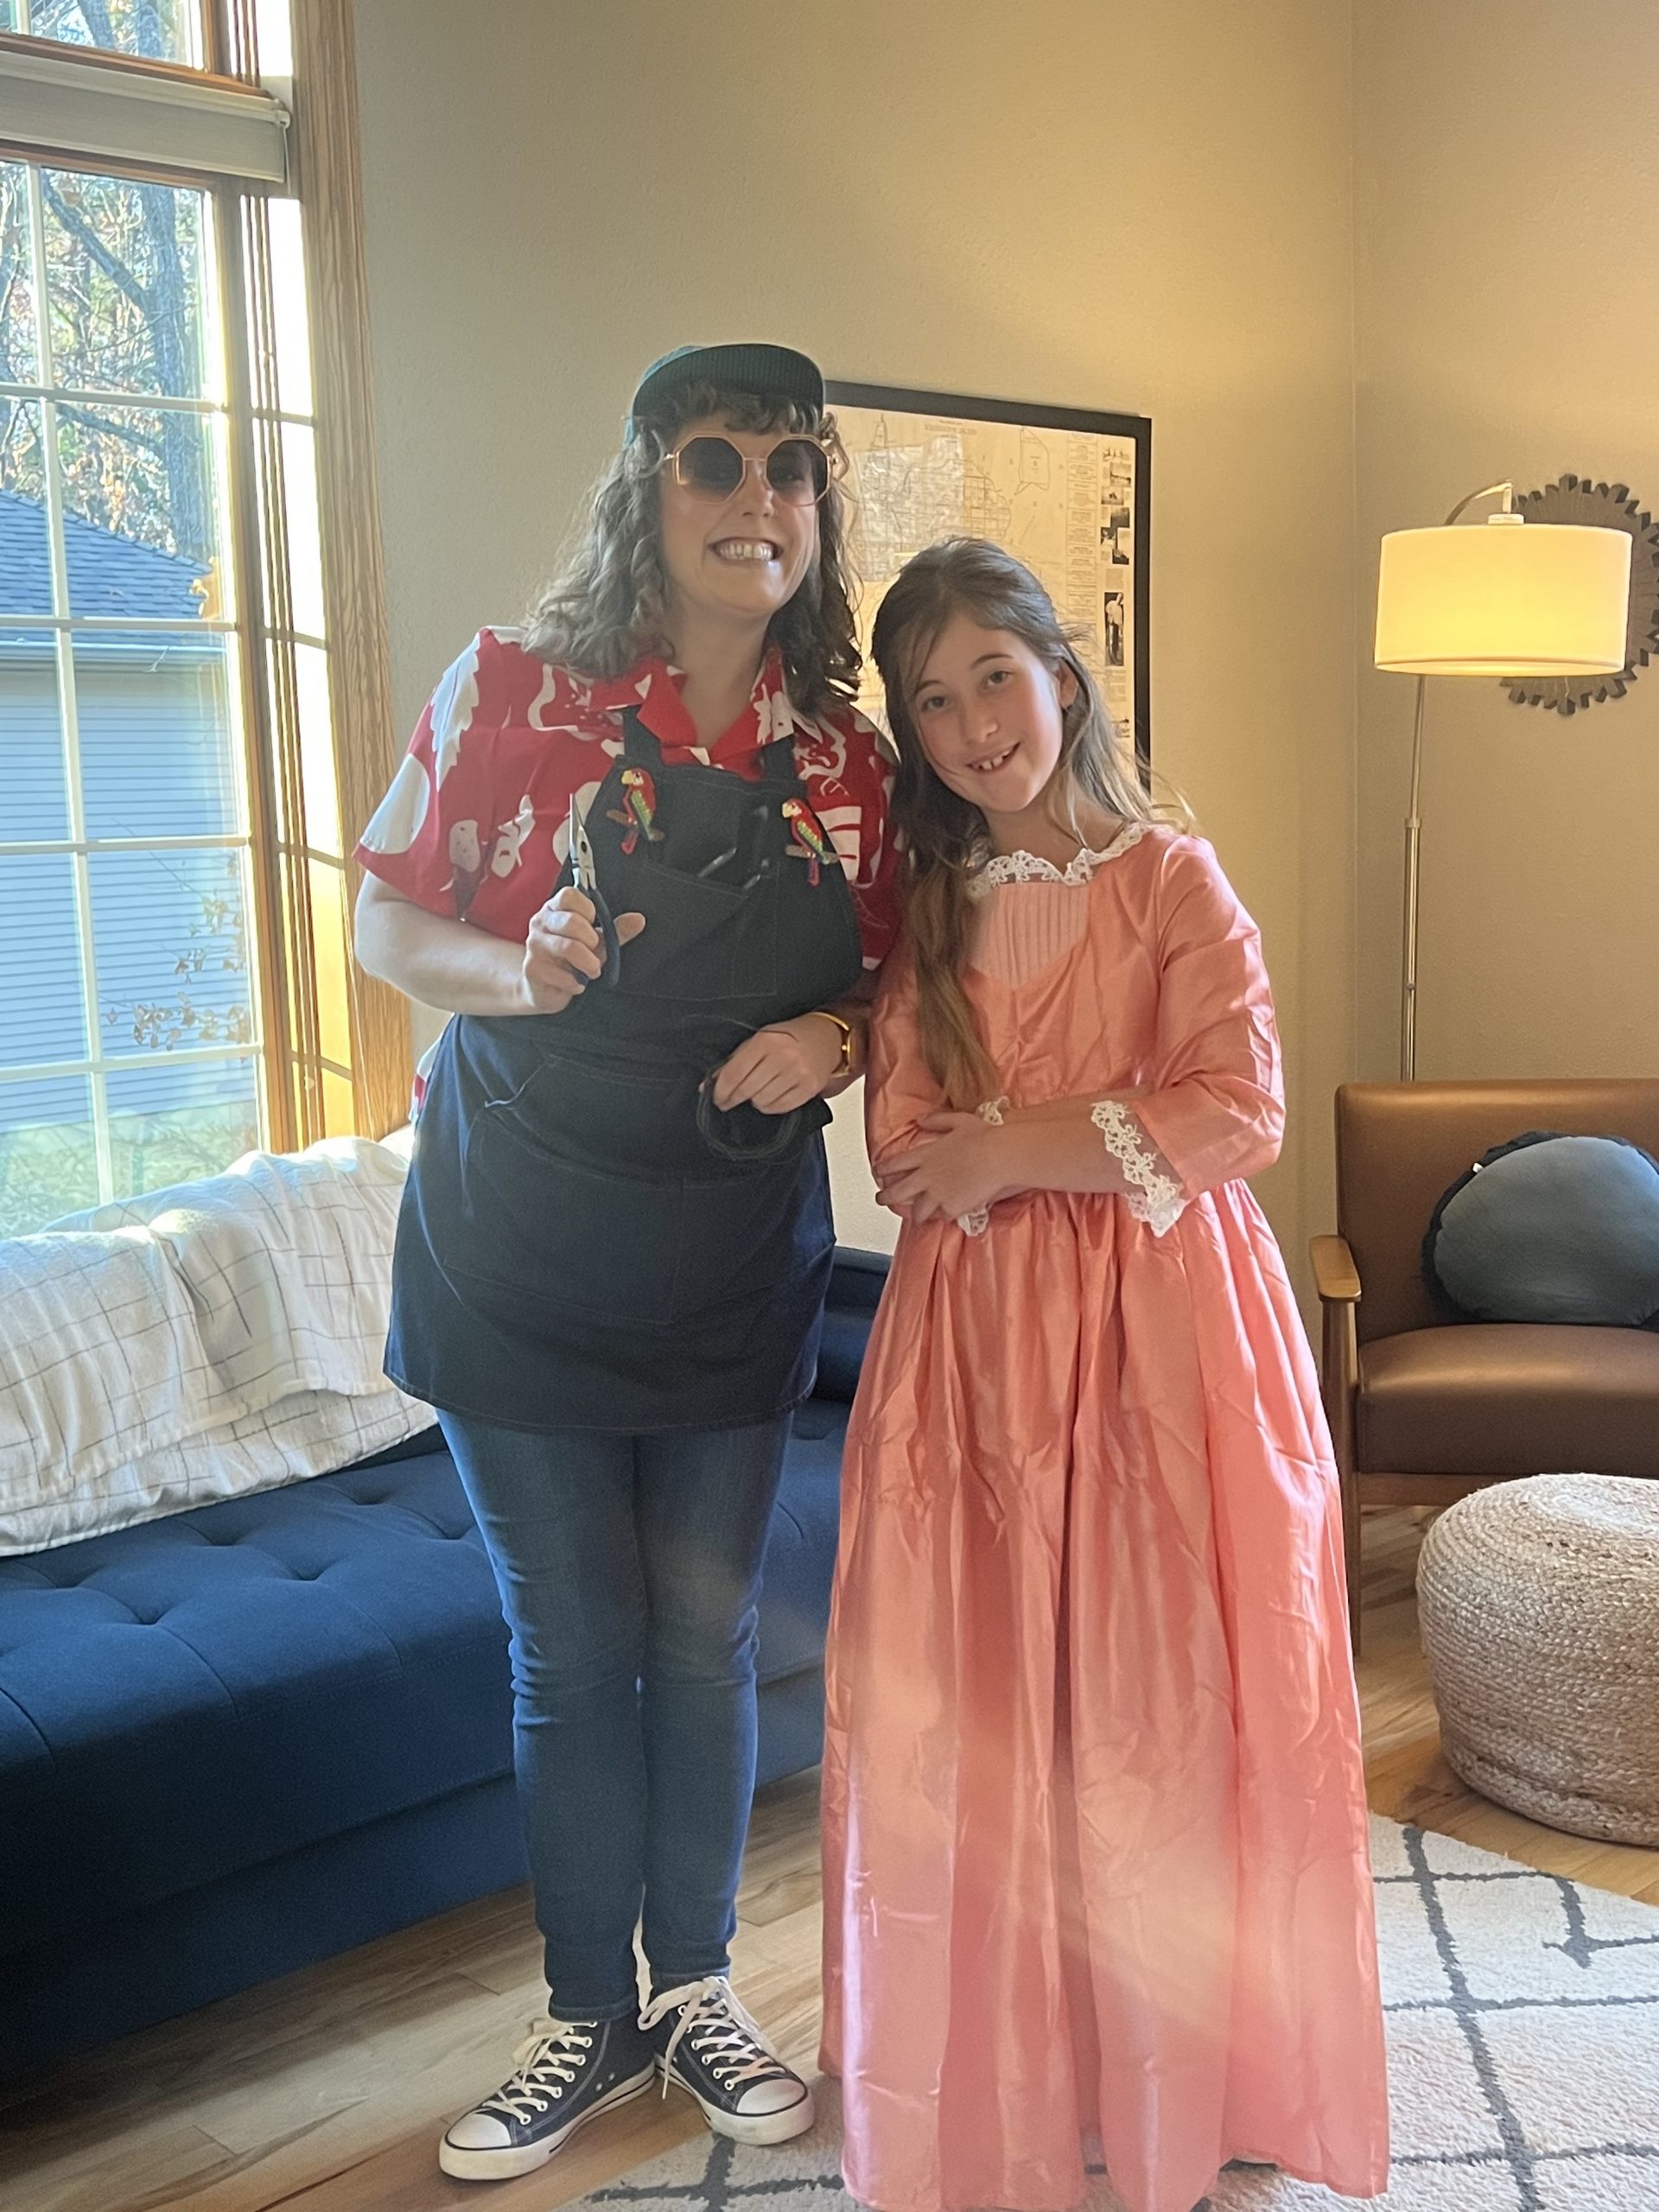 This photo shows Catie Anderson dressed as sculptor Tom Hill with hat, sunglasses, fun shoes, and holding wire next to a young girl dressed as Angelica Schuyler, in a fancy dress